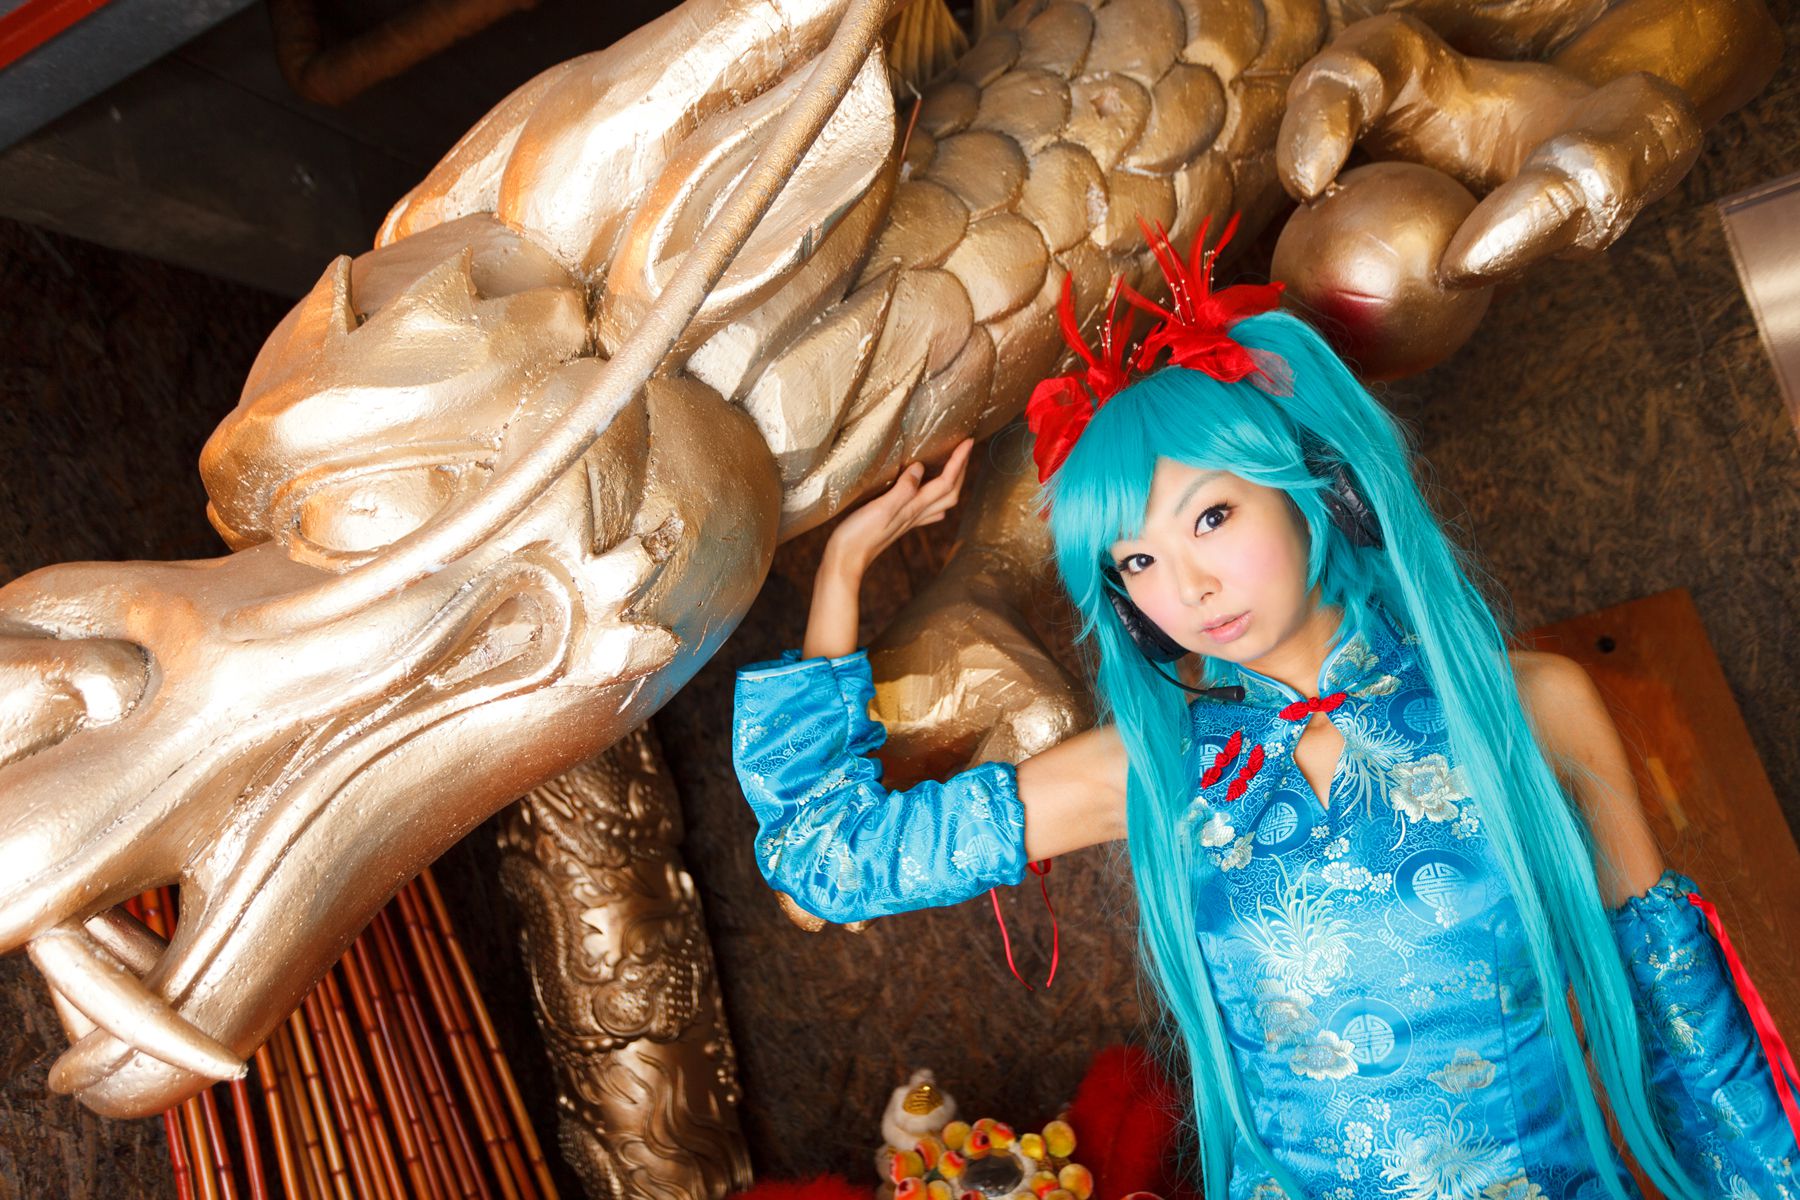 taotuhome[Cosplay] Necoco as Hatsune Miku from Vocaloid 套图第28张